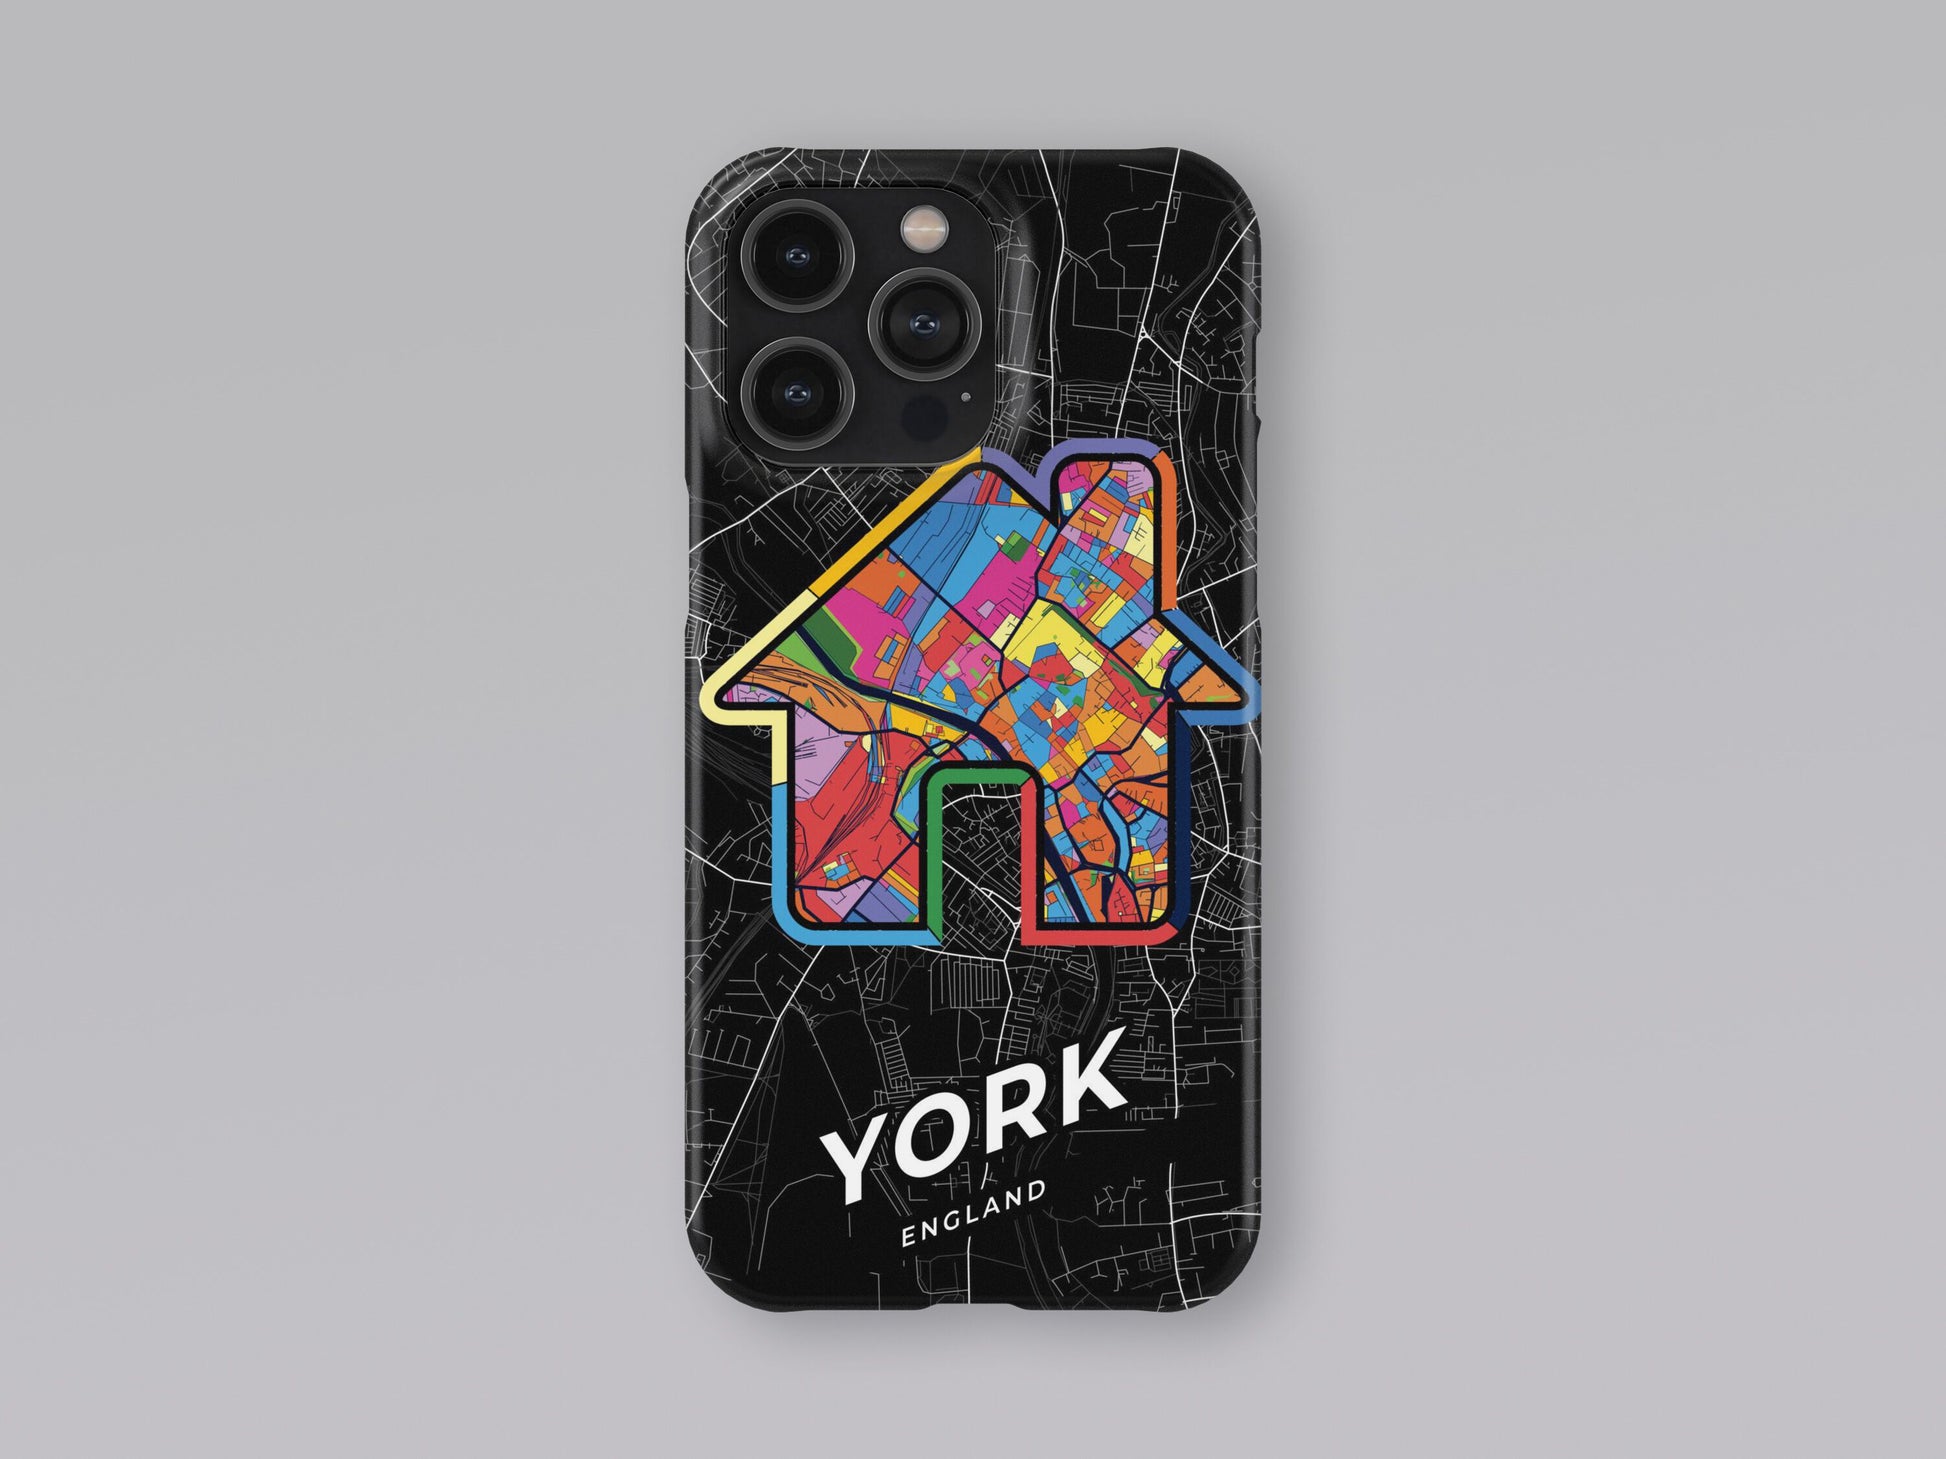 York England slim phone case with colorful icon 3